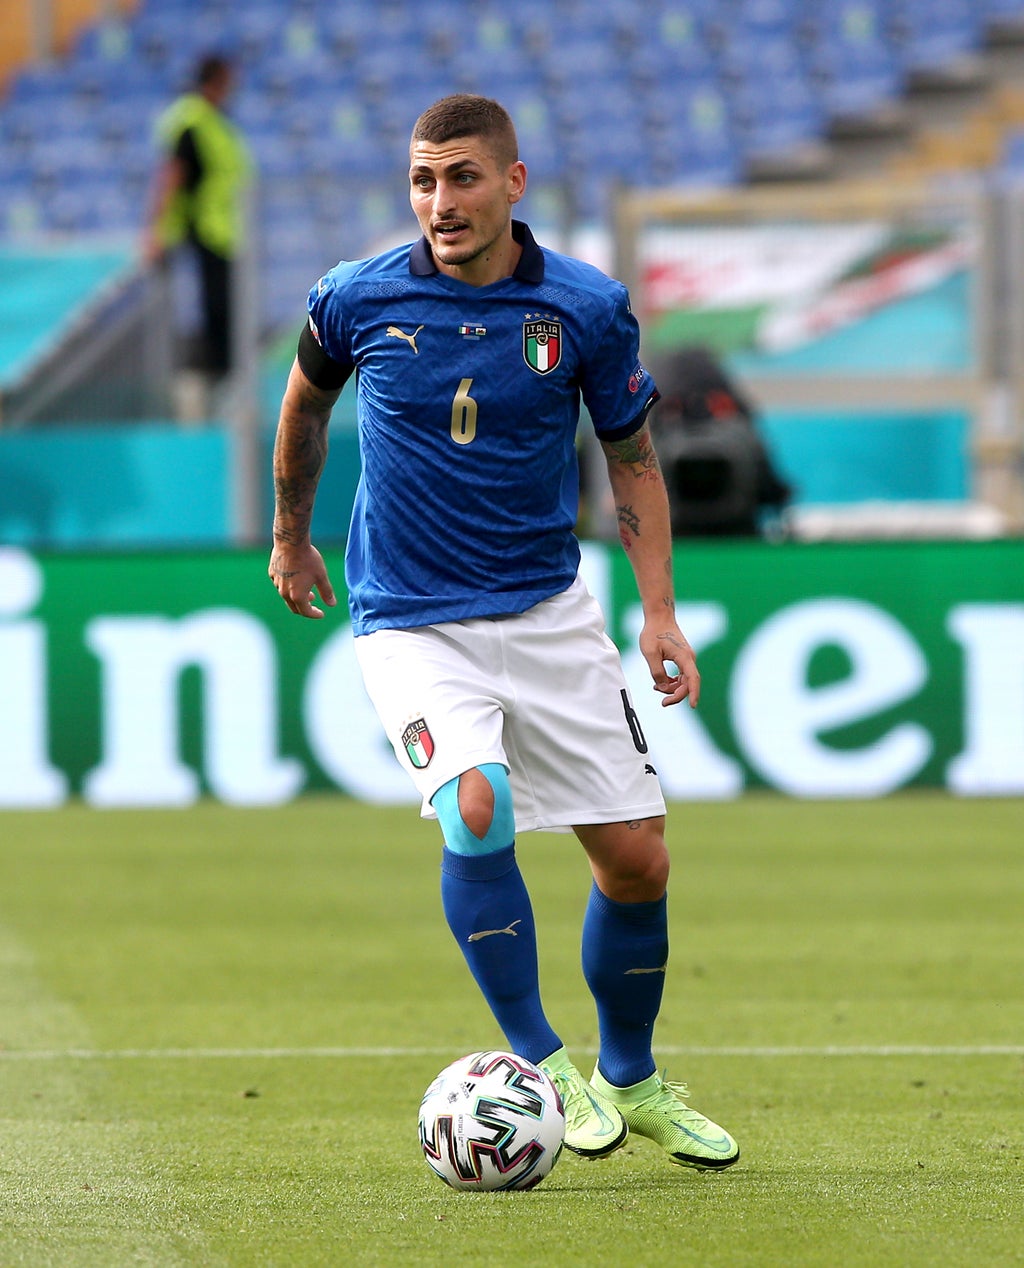 Euro 2020 matchday 29: Marco Verratti expecting epic final against England